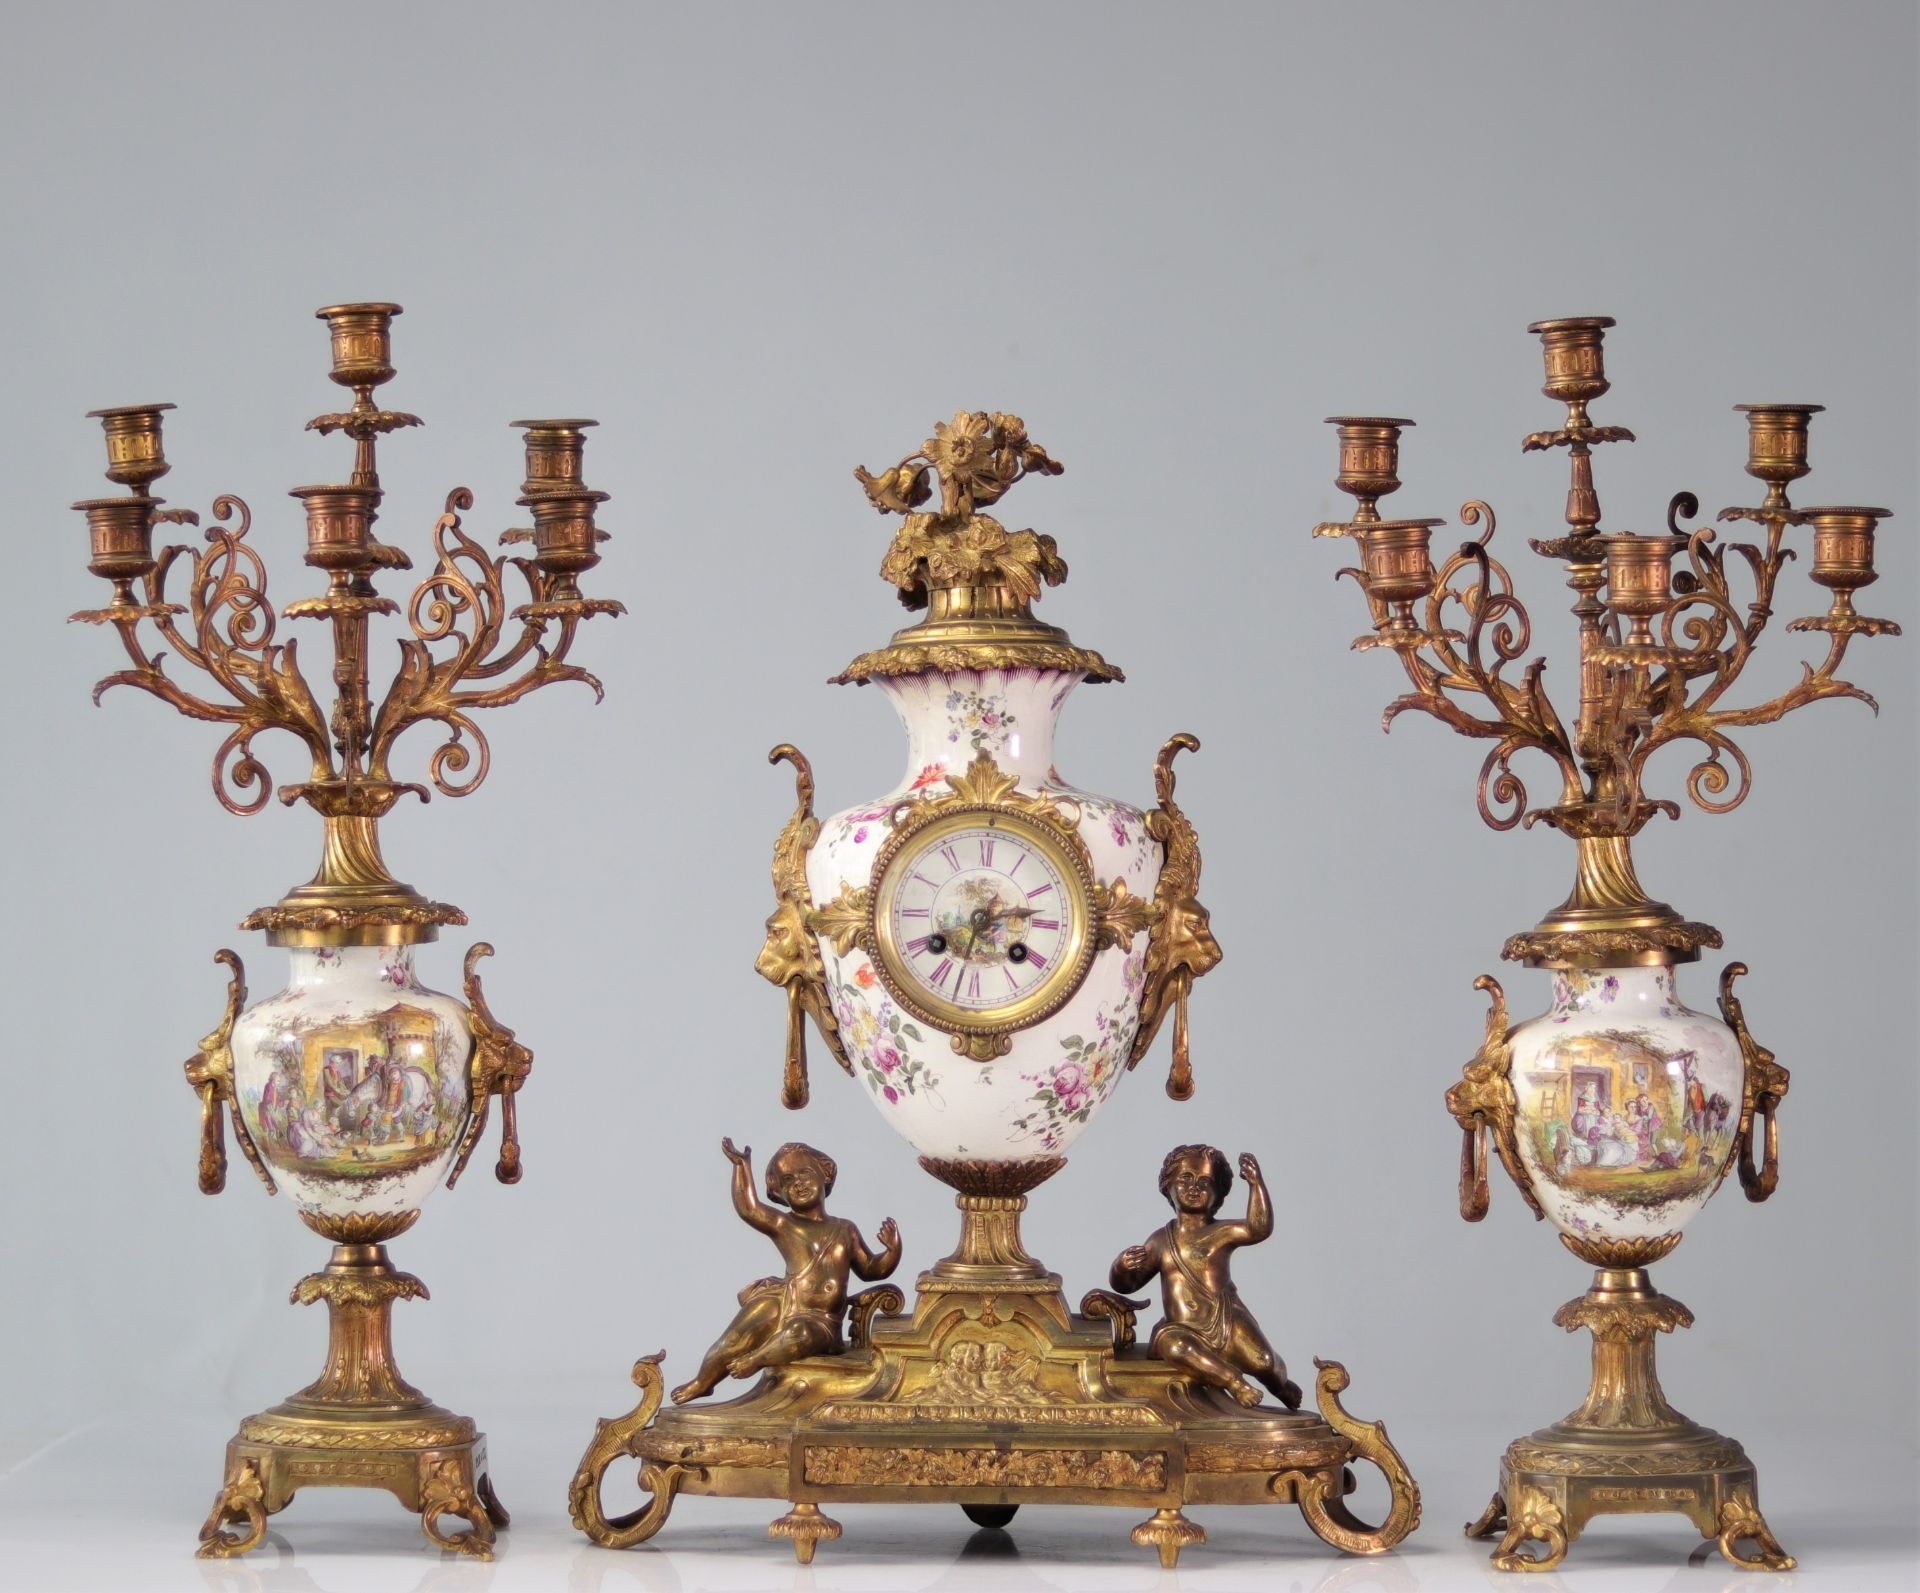 Imposing pendulum and candelabra set in bronze and porcelain decorated with flowers and characters